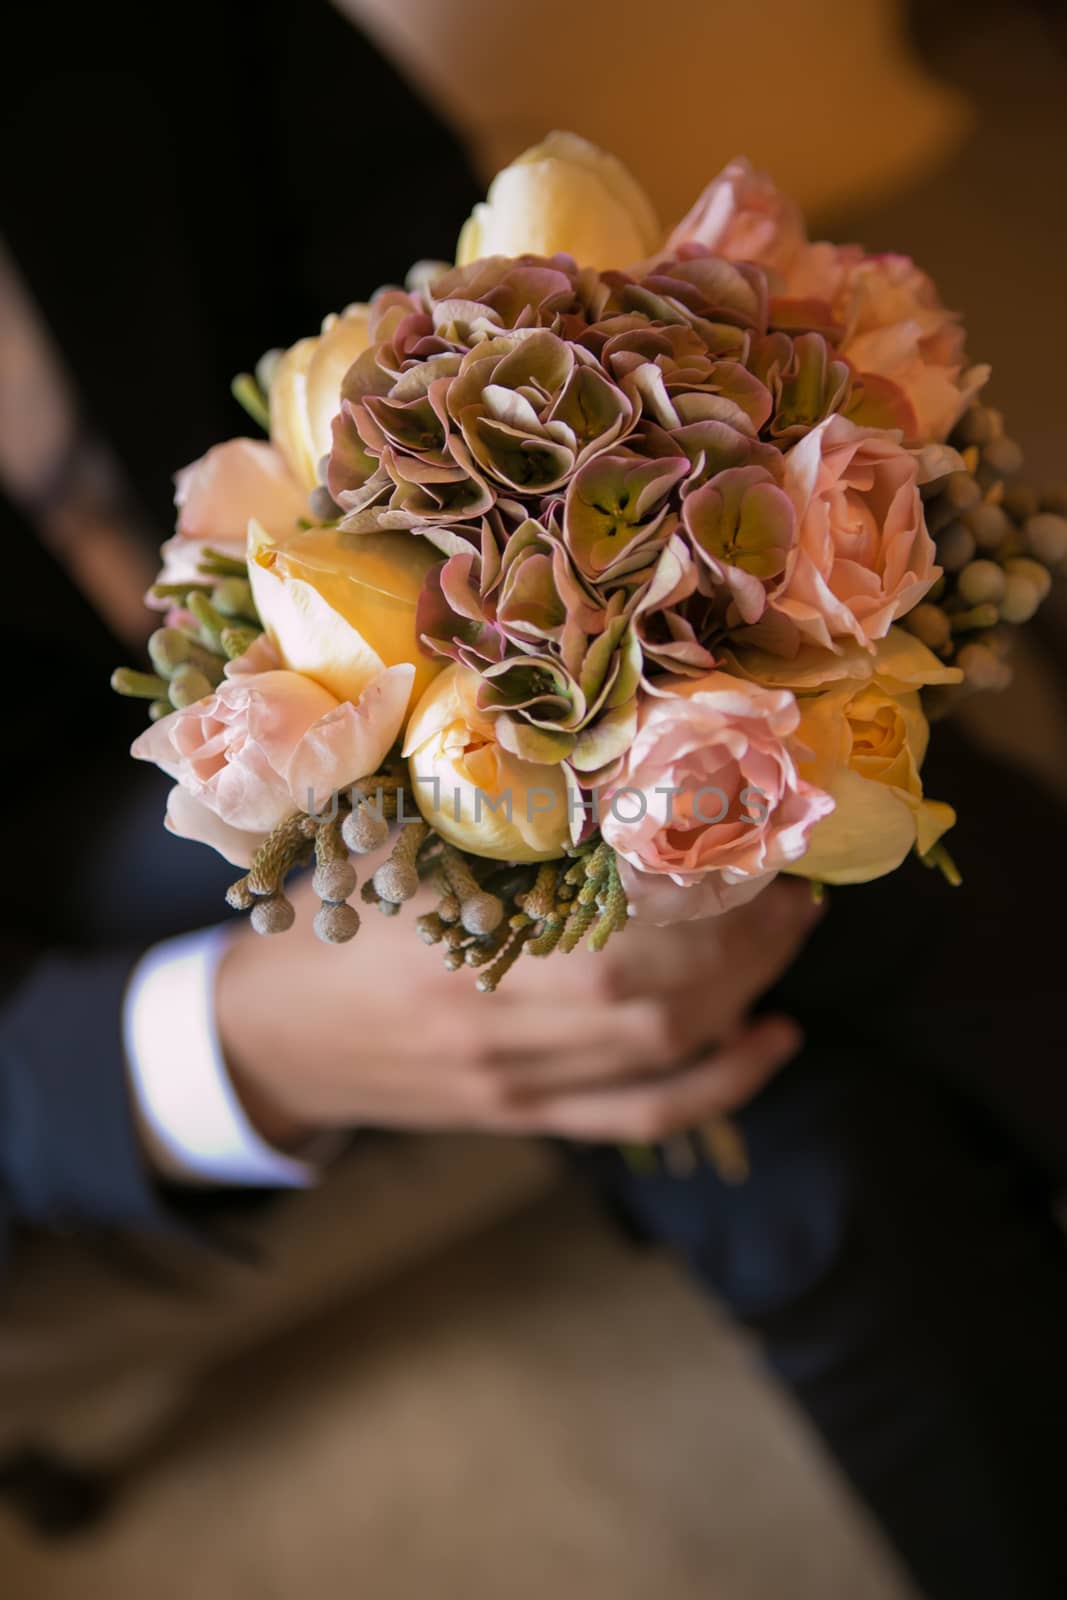 Groom holding in hands delicate, expensive, trendy bridal wedding bouquet of flowers.